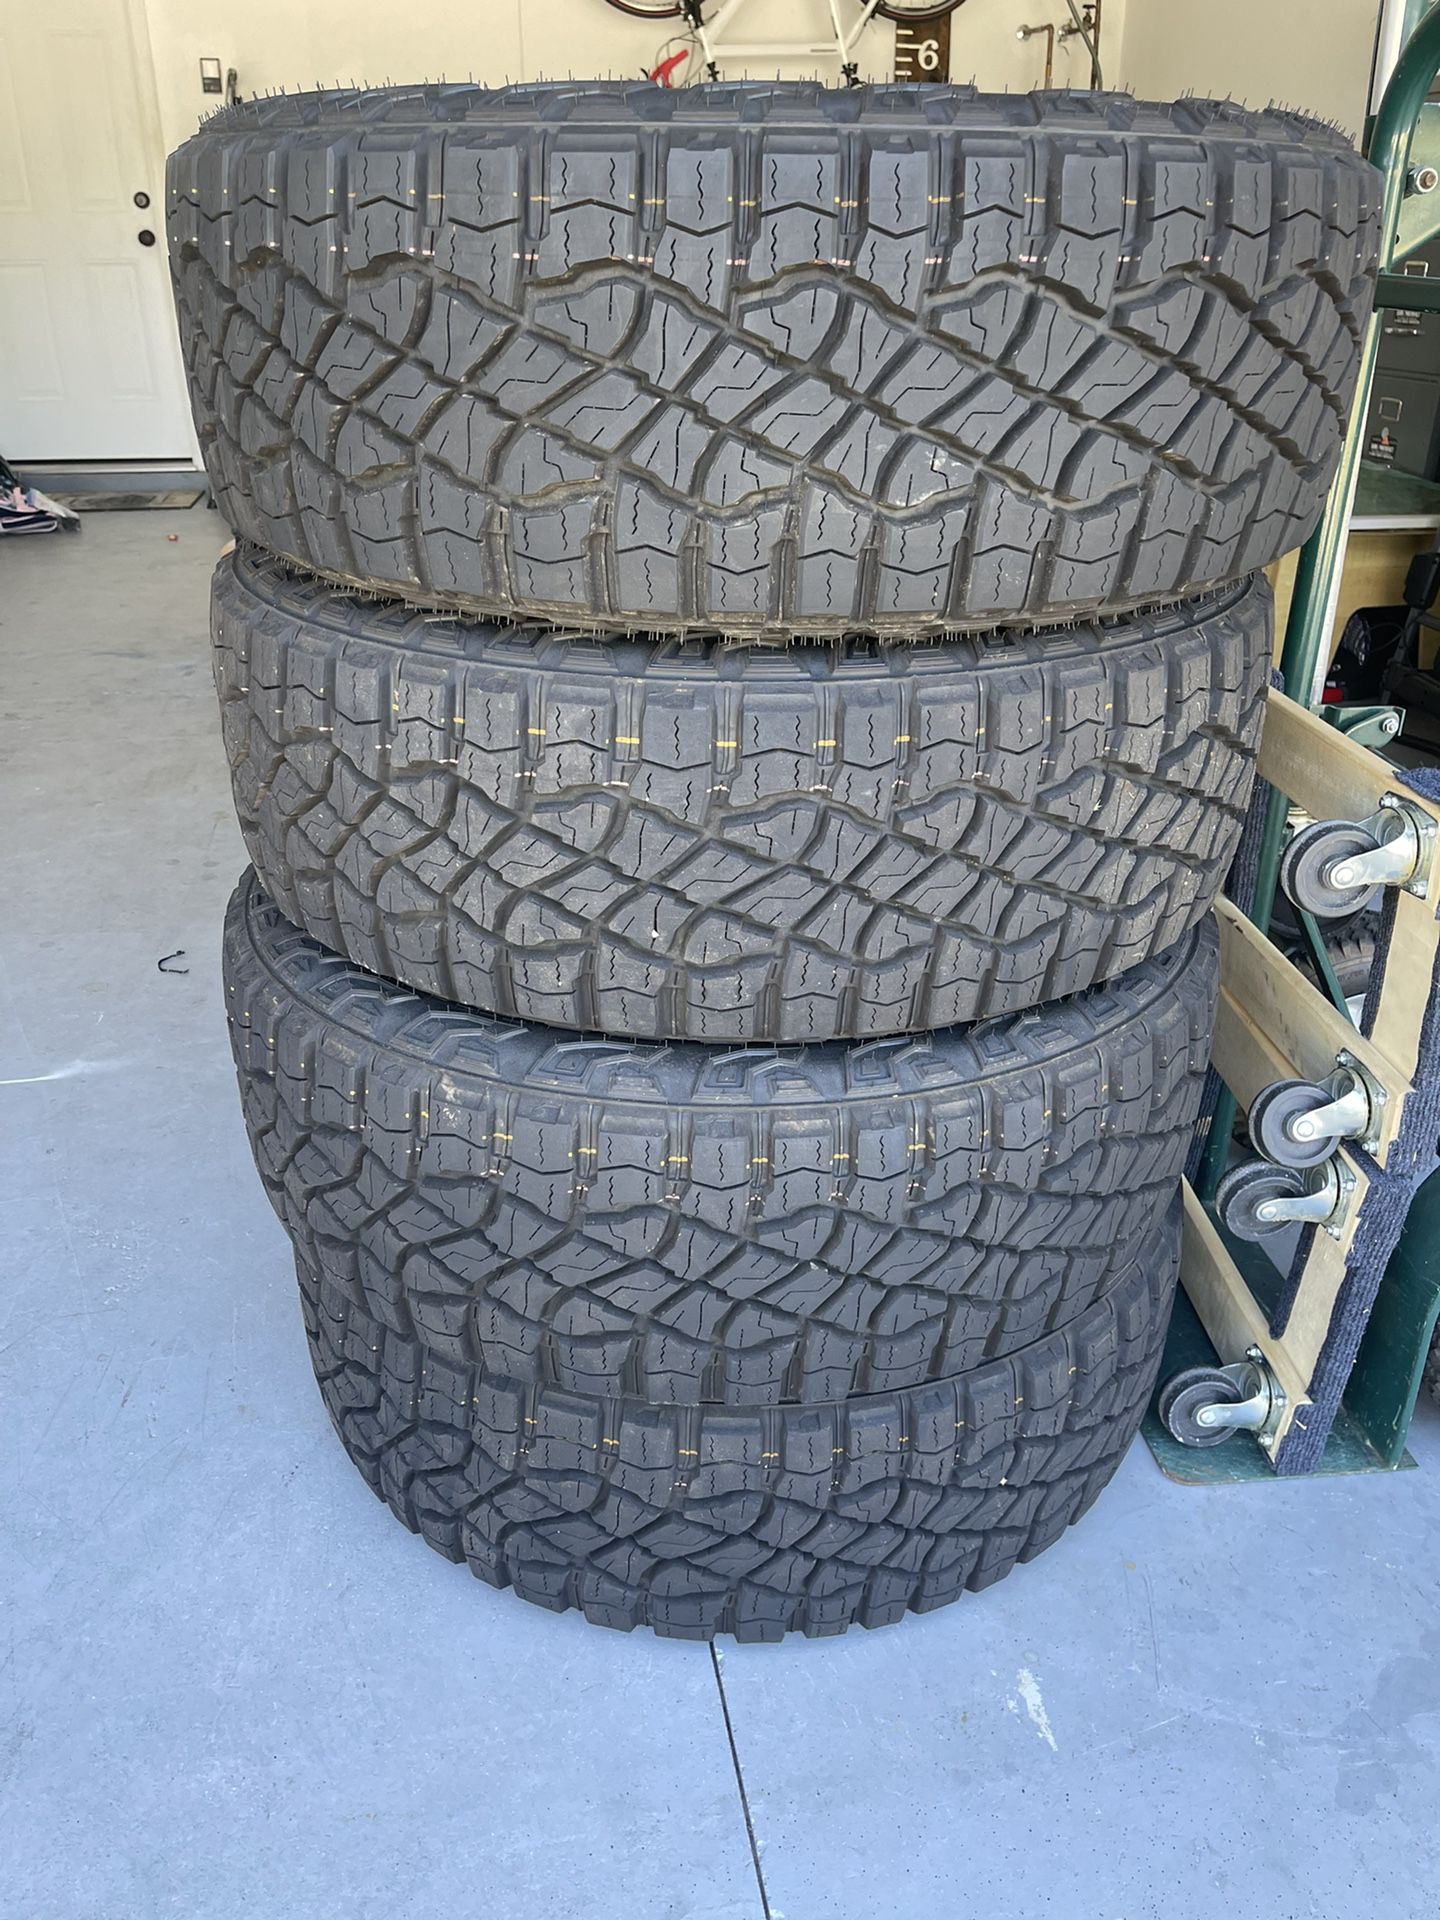 Brand New Goodyear Mud Tires for Sale in Panama City Beach, FL - OfferUp